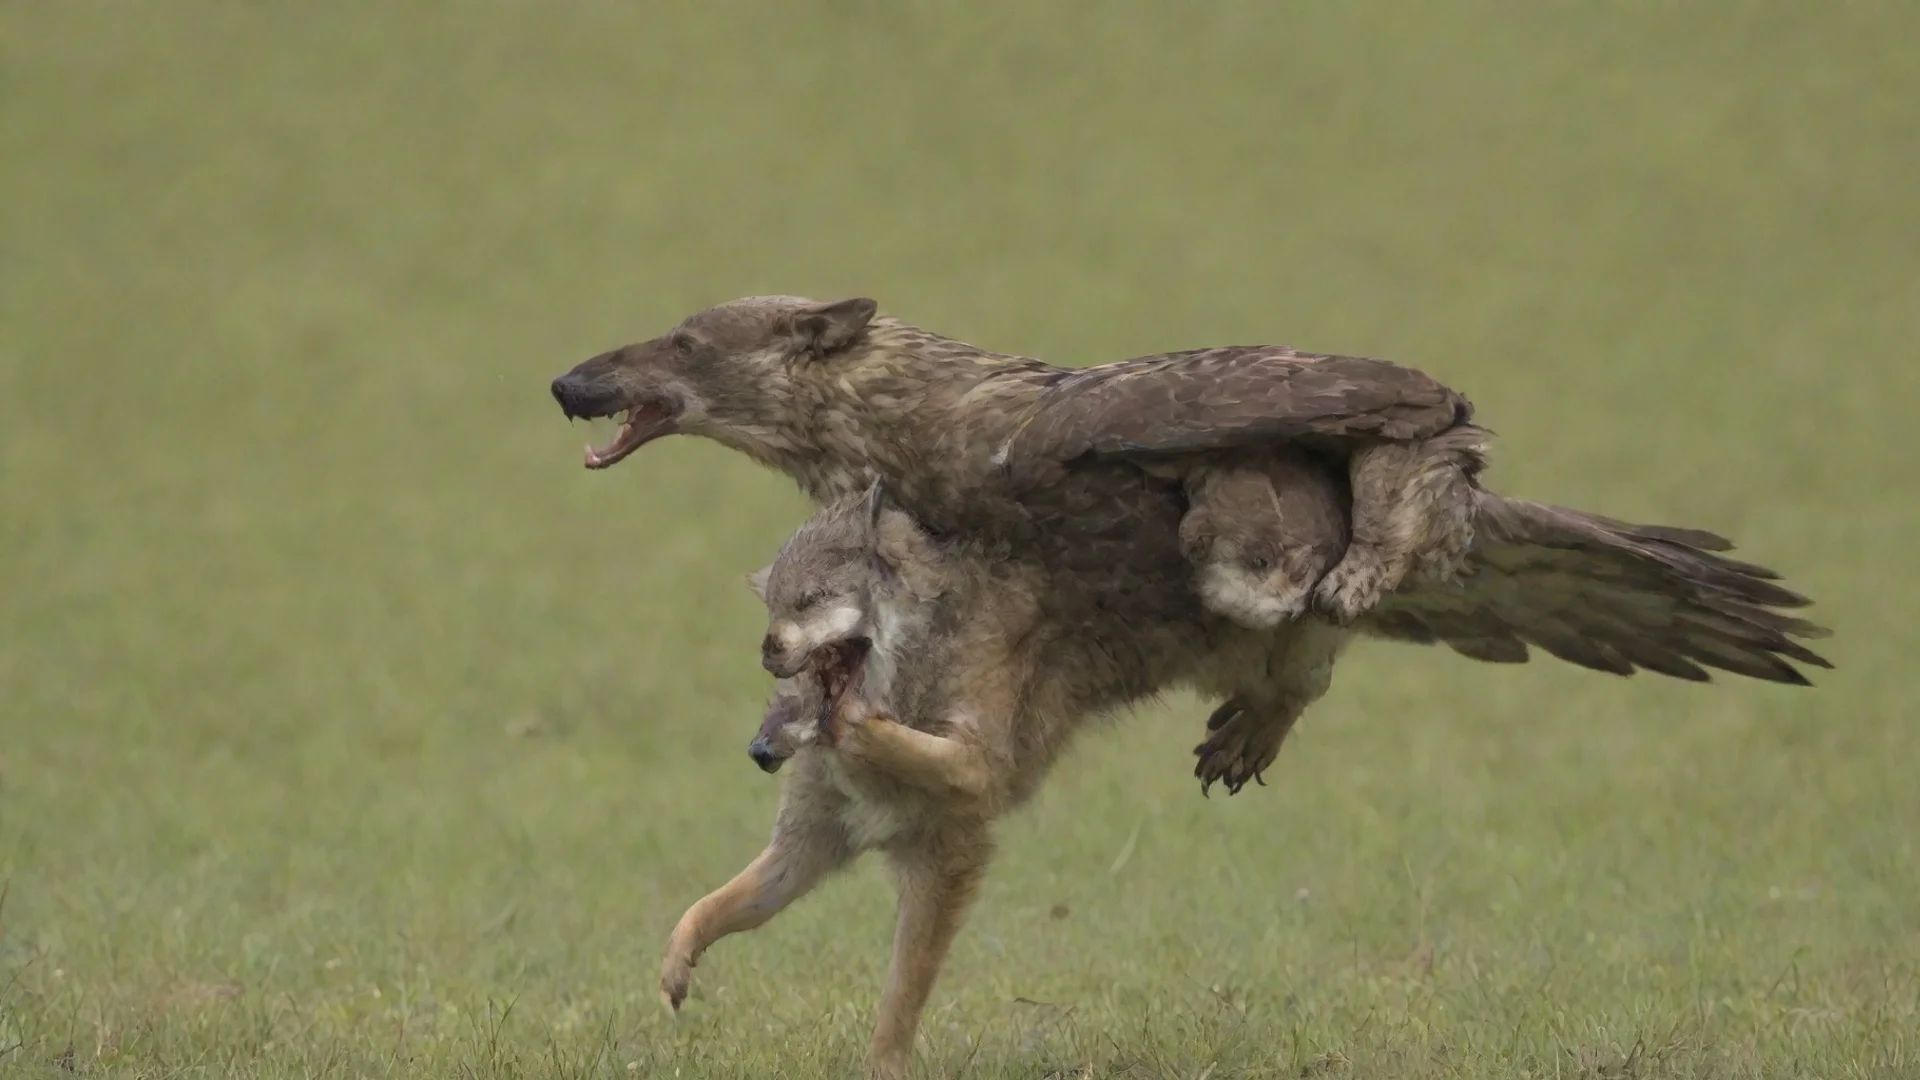 aiamazing a wolf pup getting carried away by a hawk  awesome portrait 2 wide